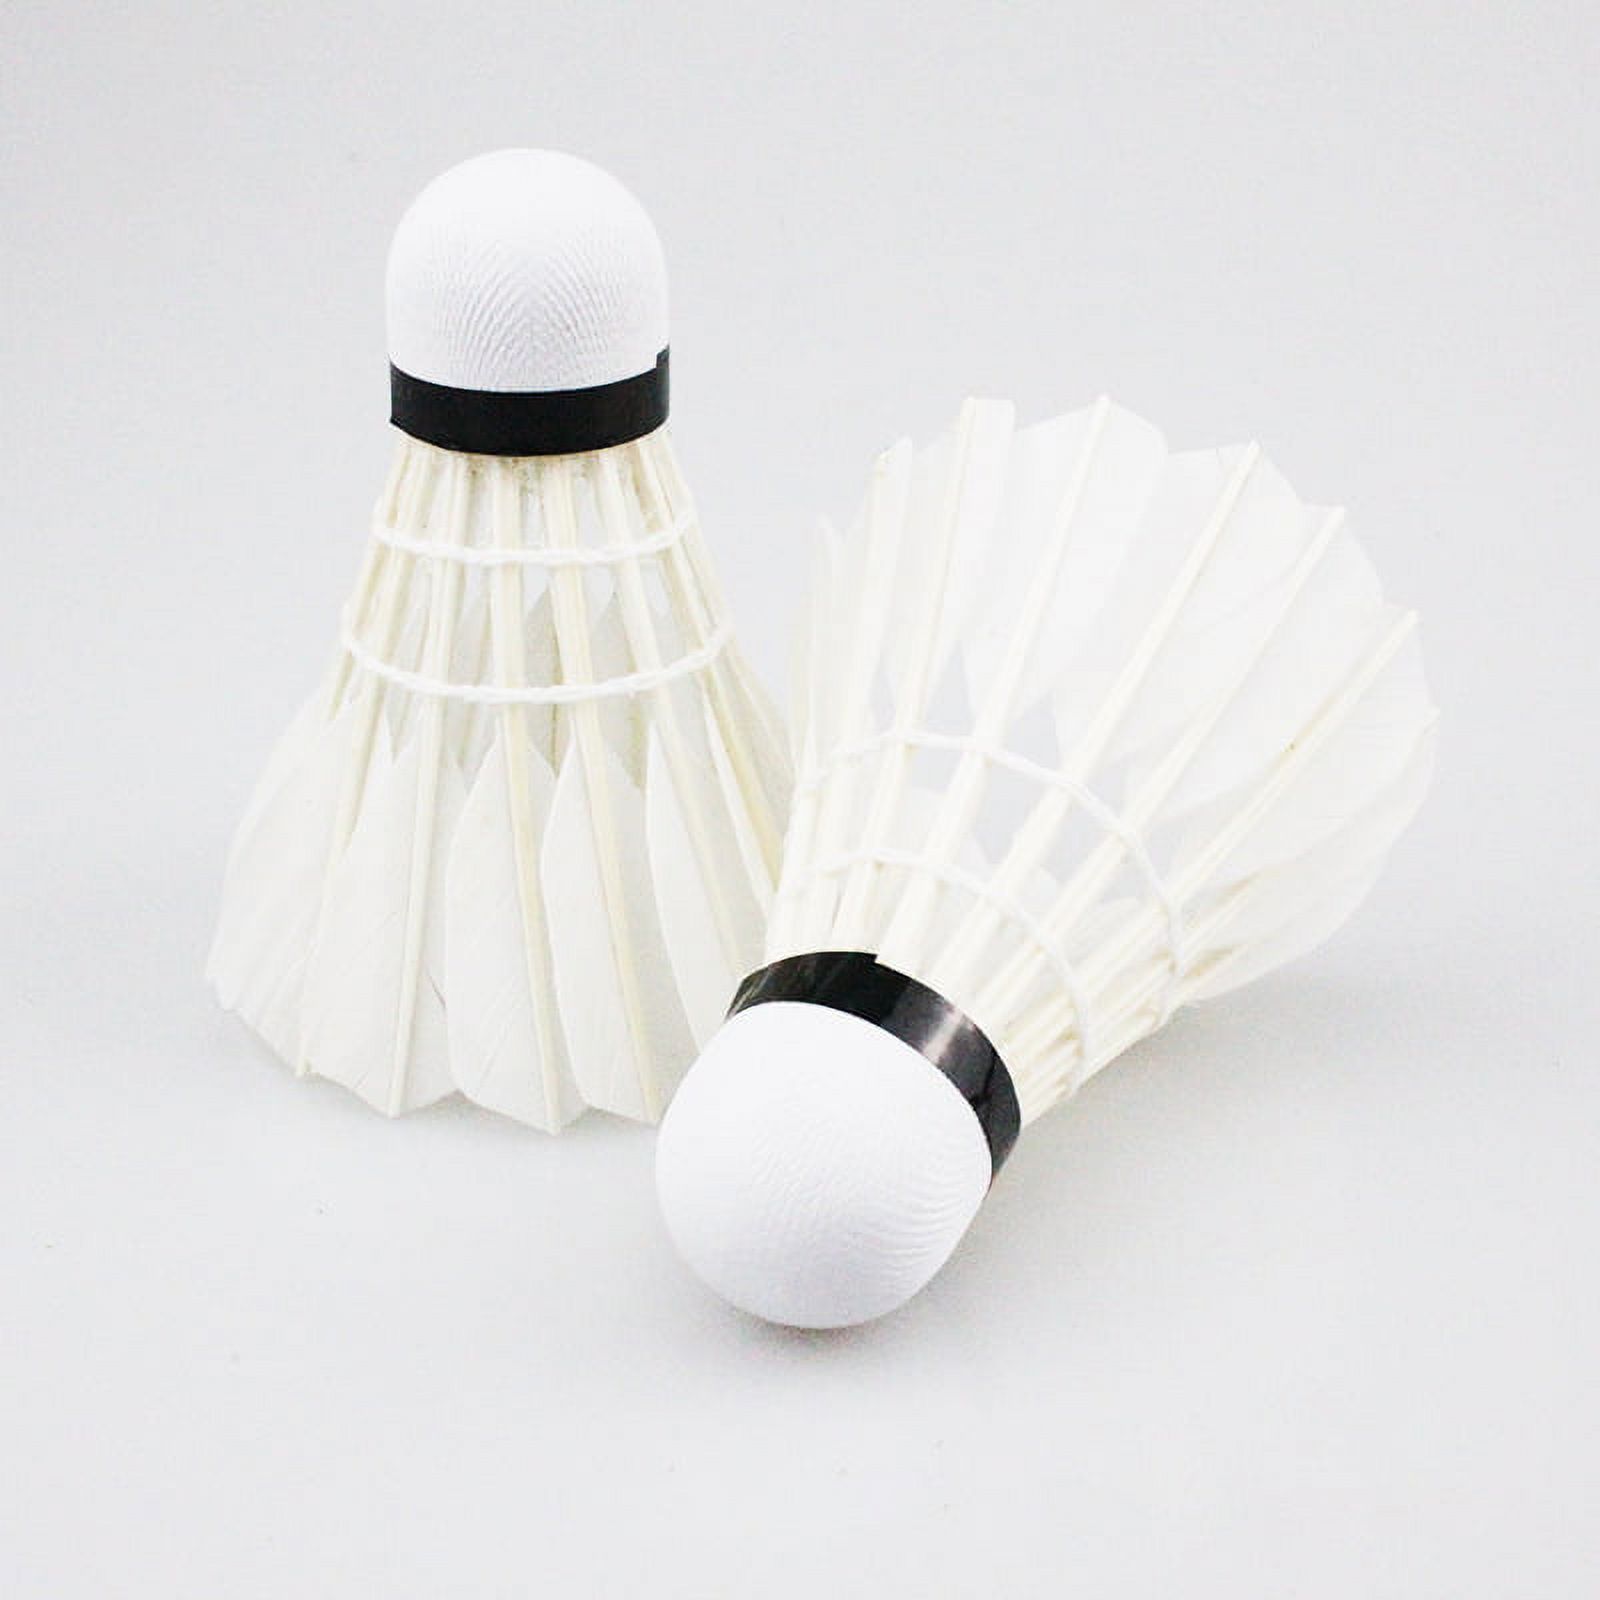 6-Pack Badminton Birdie, Professional Badminton Shuttlecocks Feather Ball with Great Durability Stability and Balance for All Ages and Players - image 3 of 6